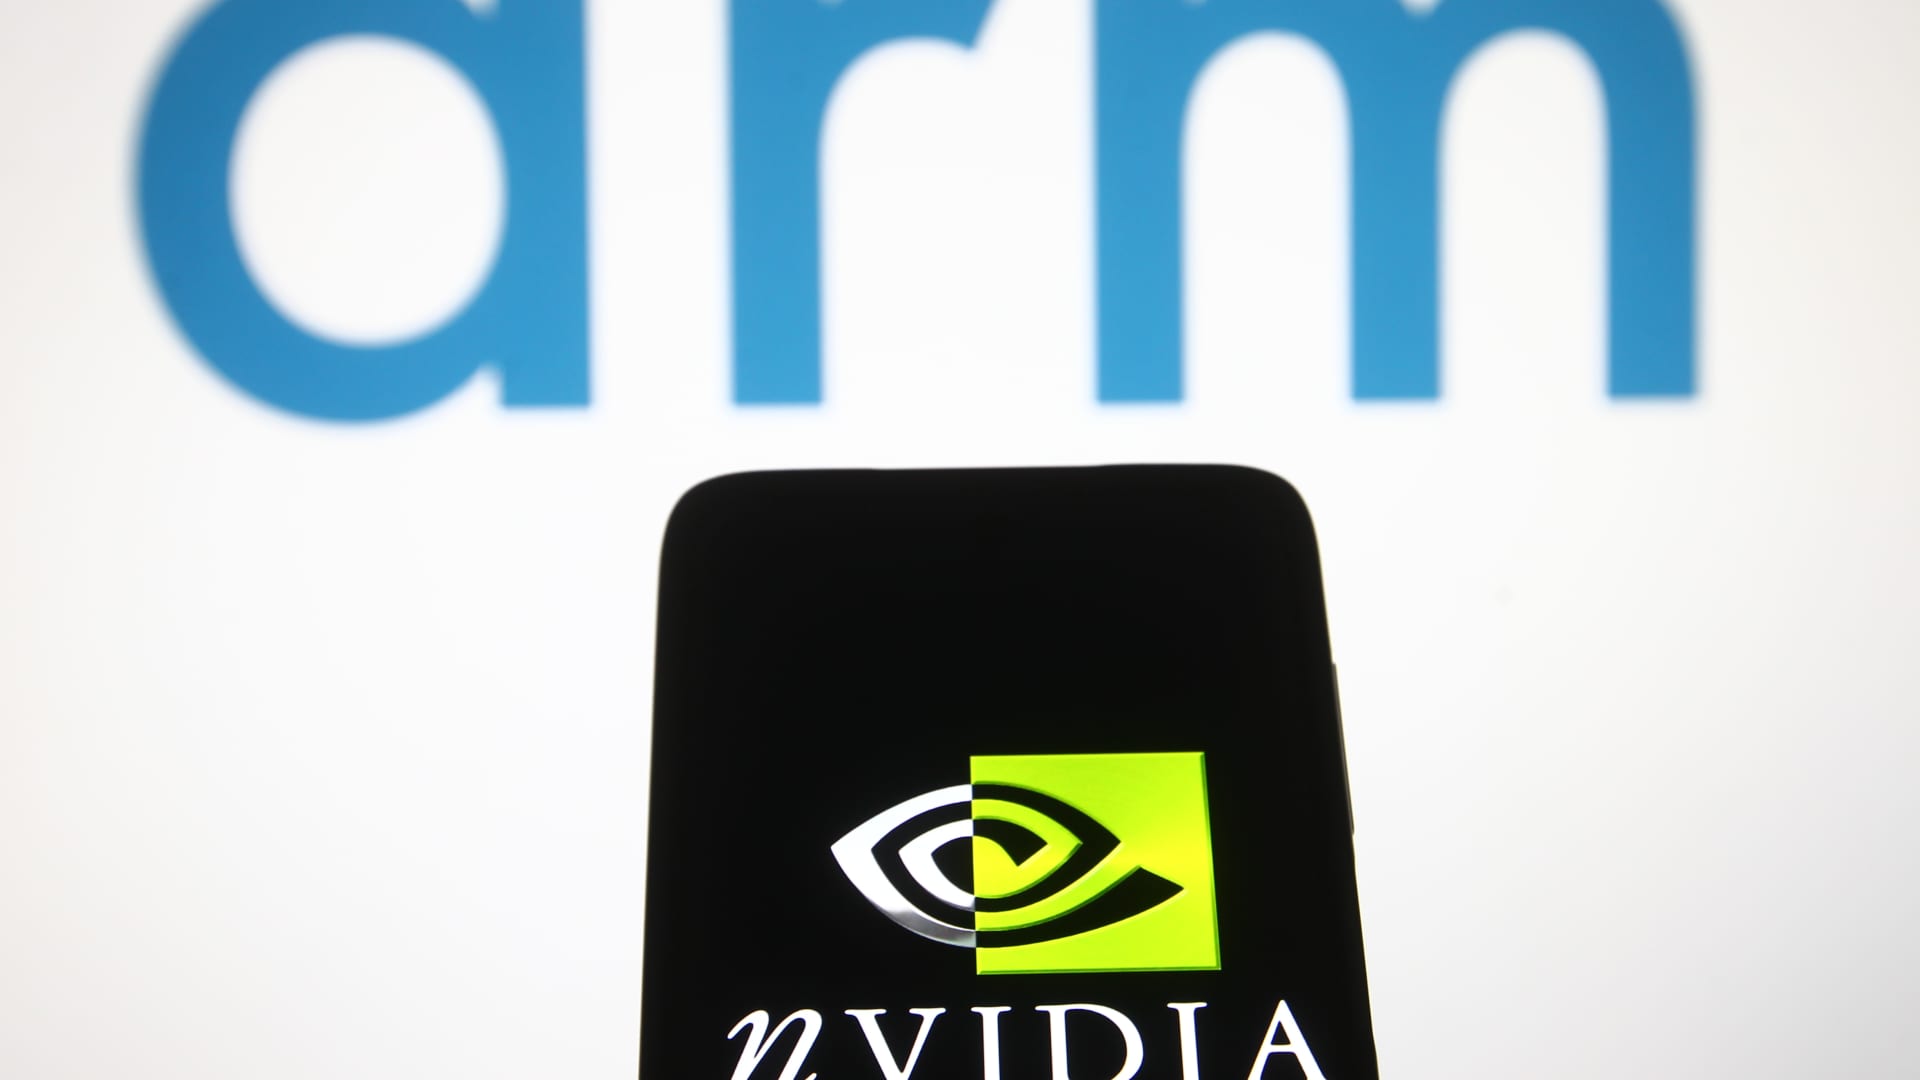 AI play in focus after huge Nvidia rally